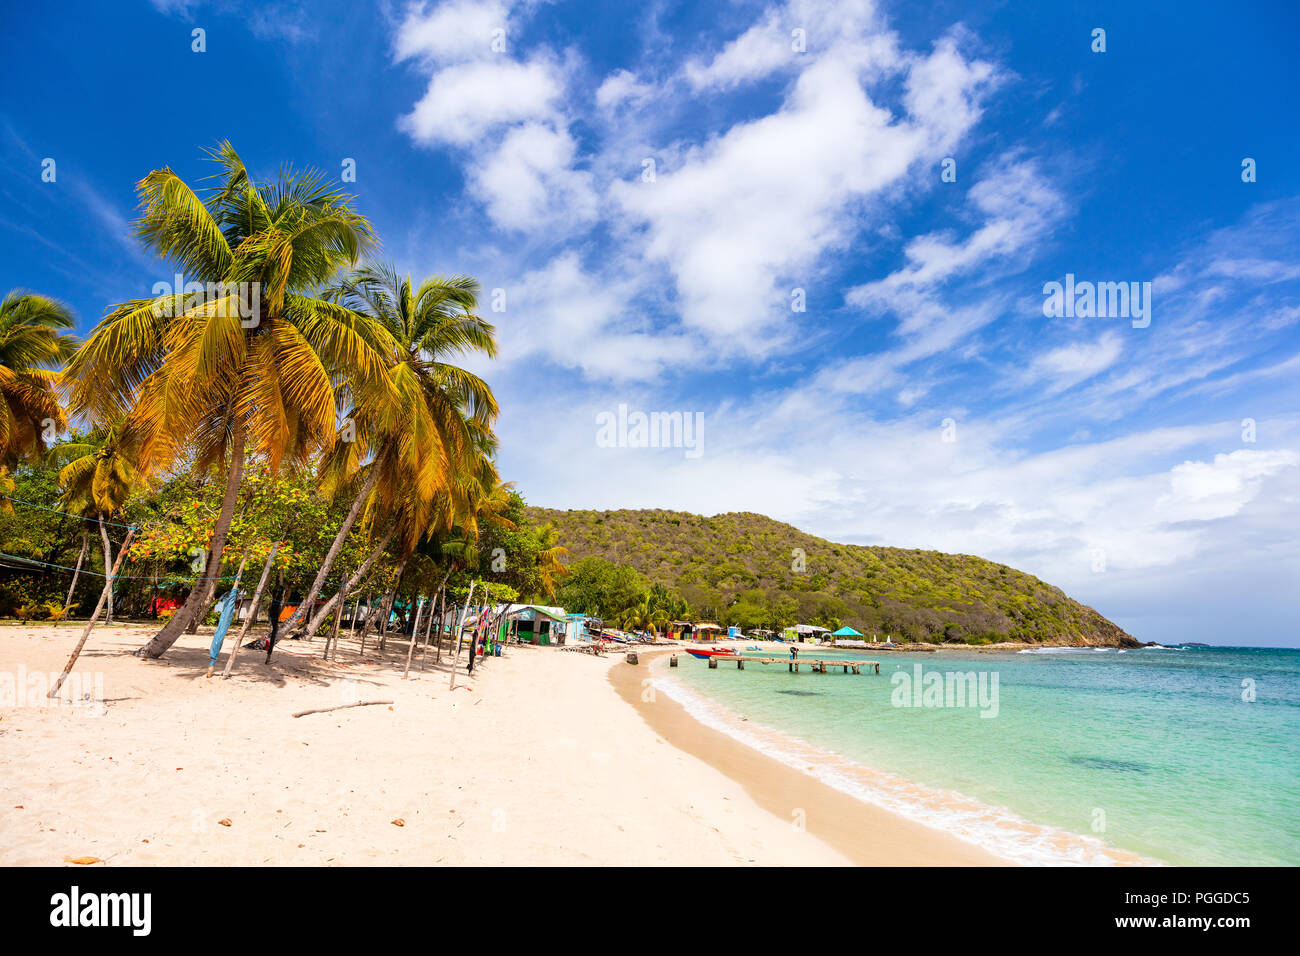 Idyllic tropical beach with white sand, palm trees and turquoise Caribbean sea water on Mayreau island in St Vincent and the Grenadines Stock Photo